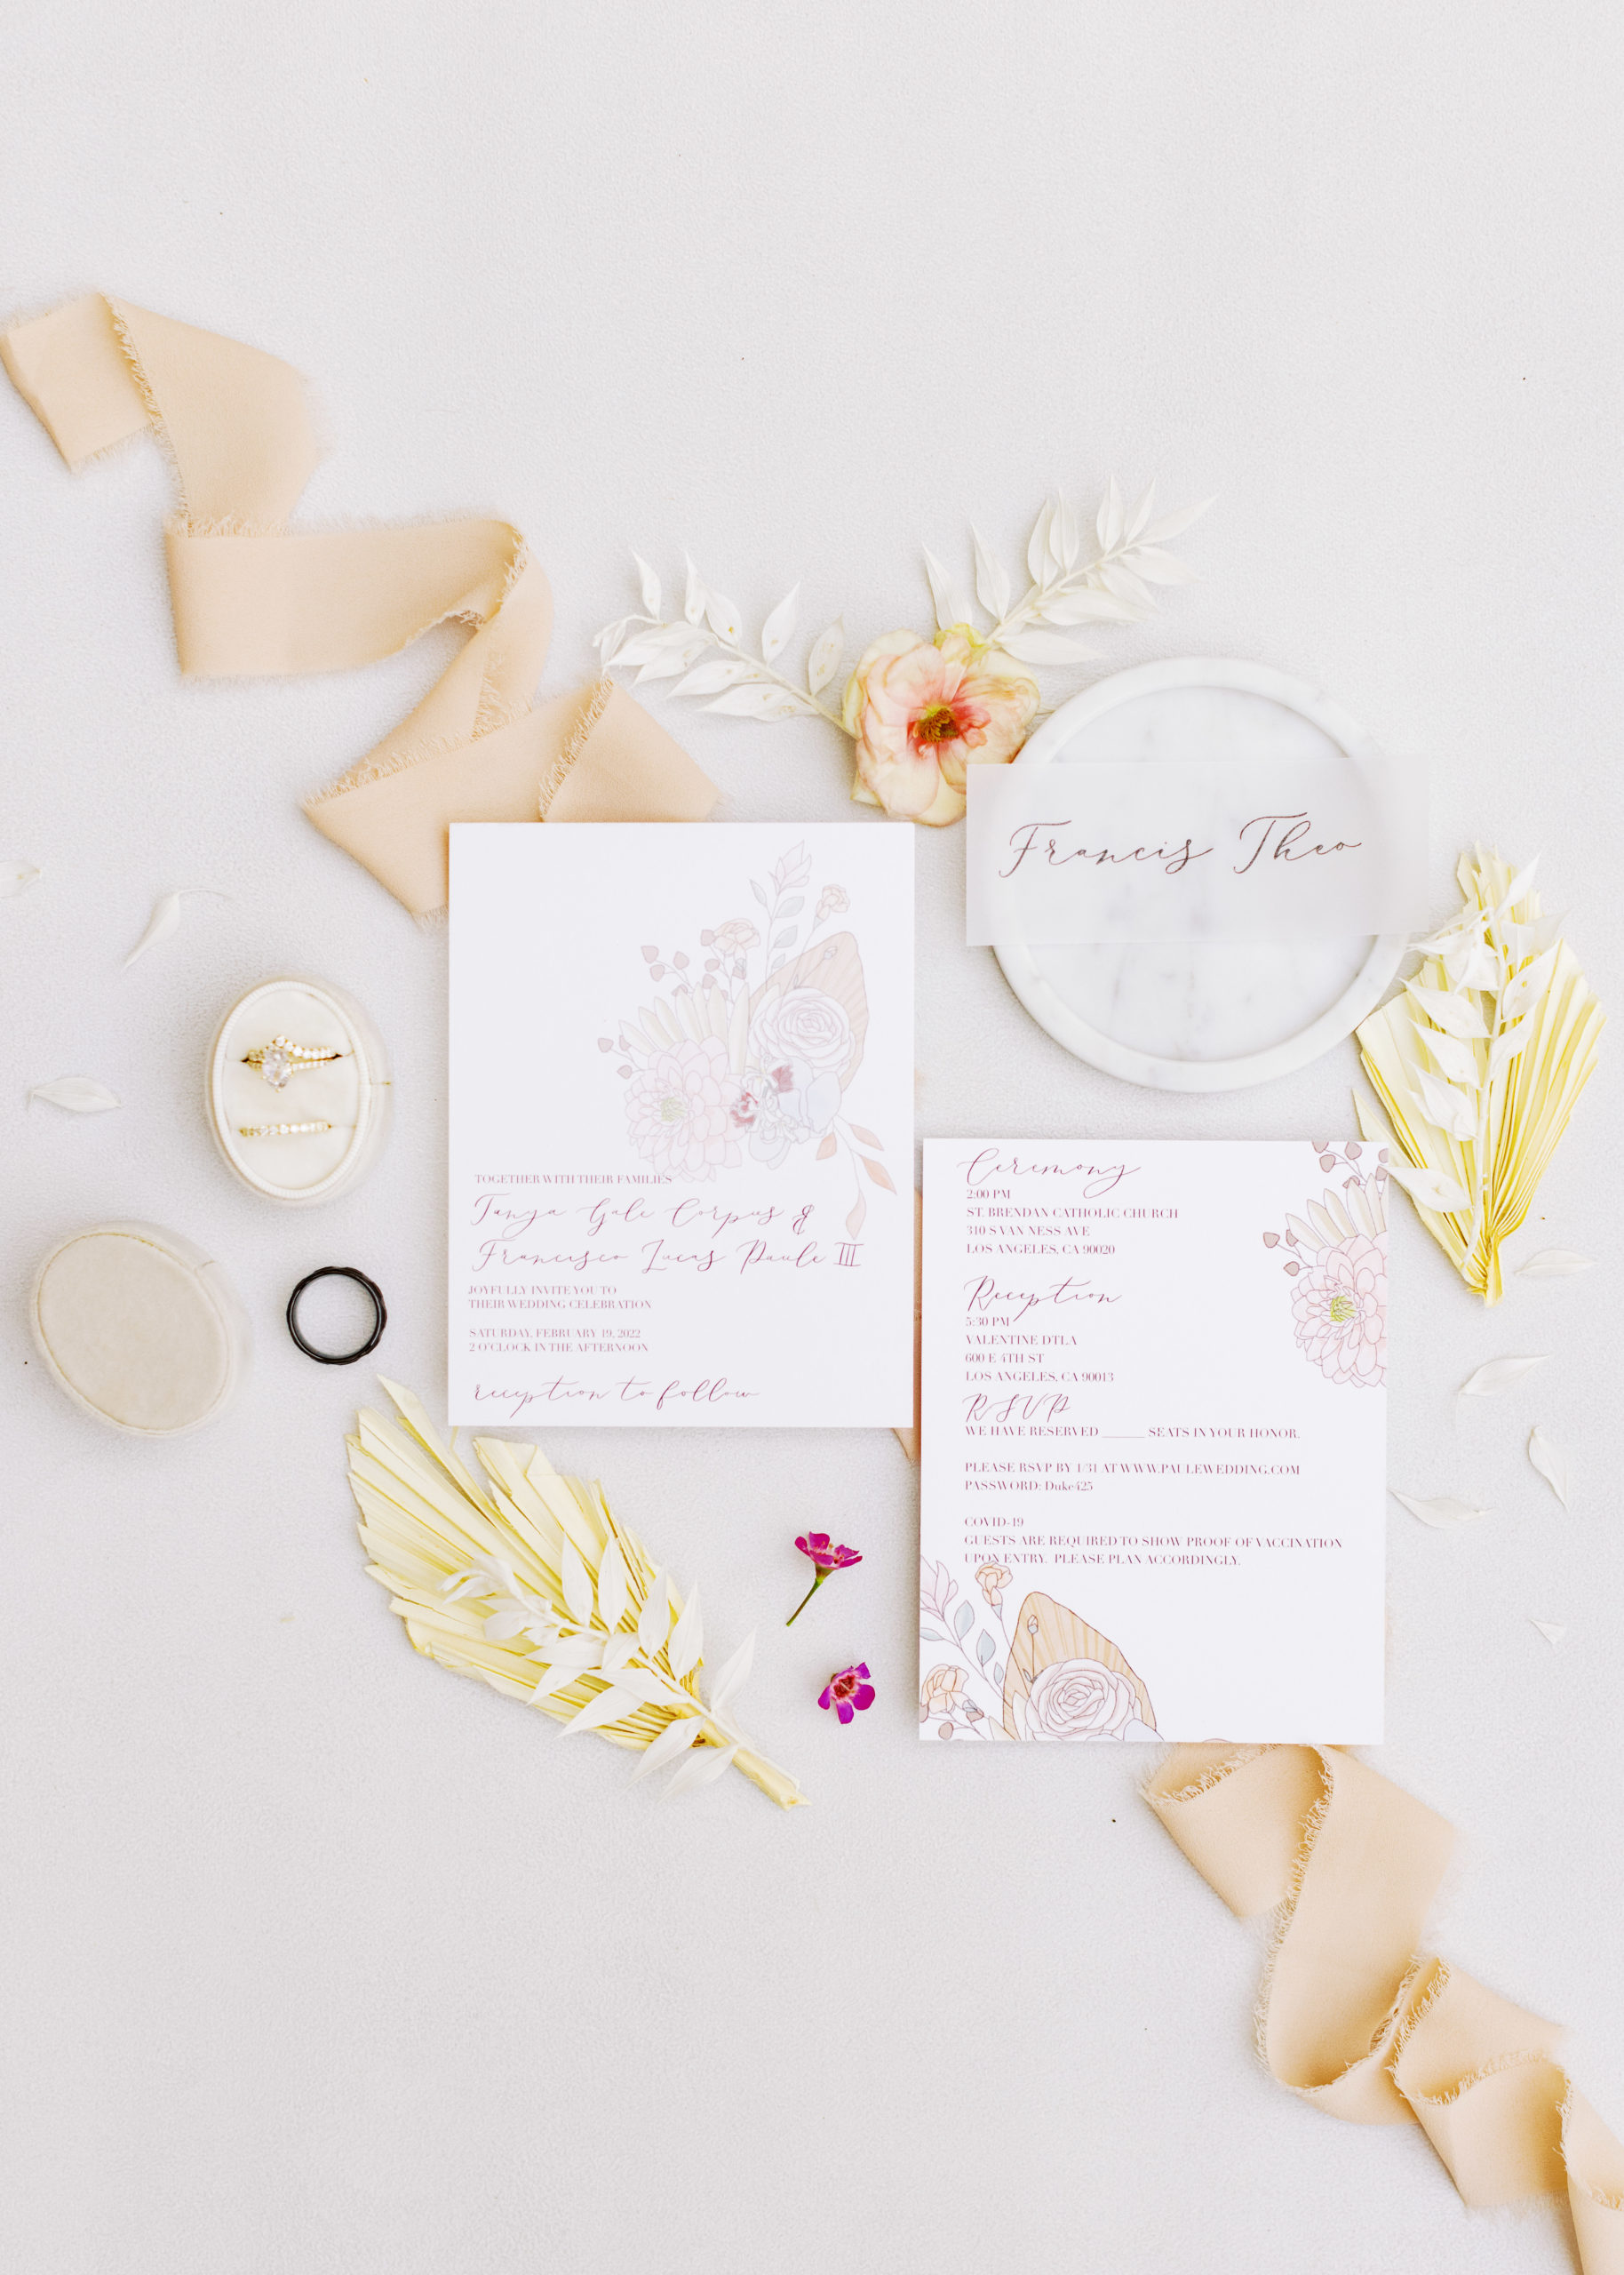 Charming church wedding invitation suite layout with cream, pink and peach colors